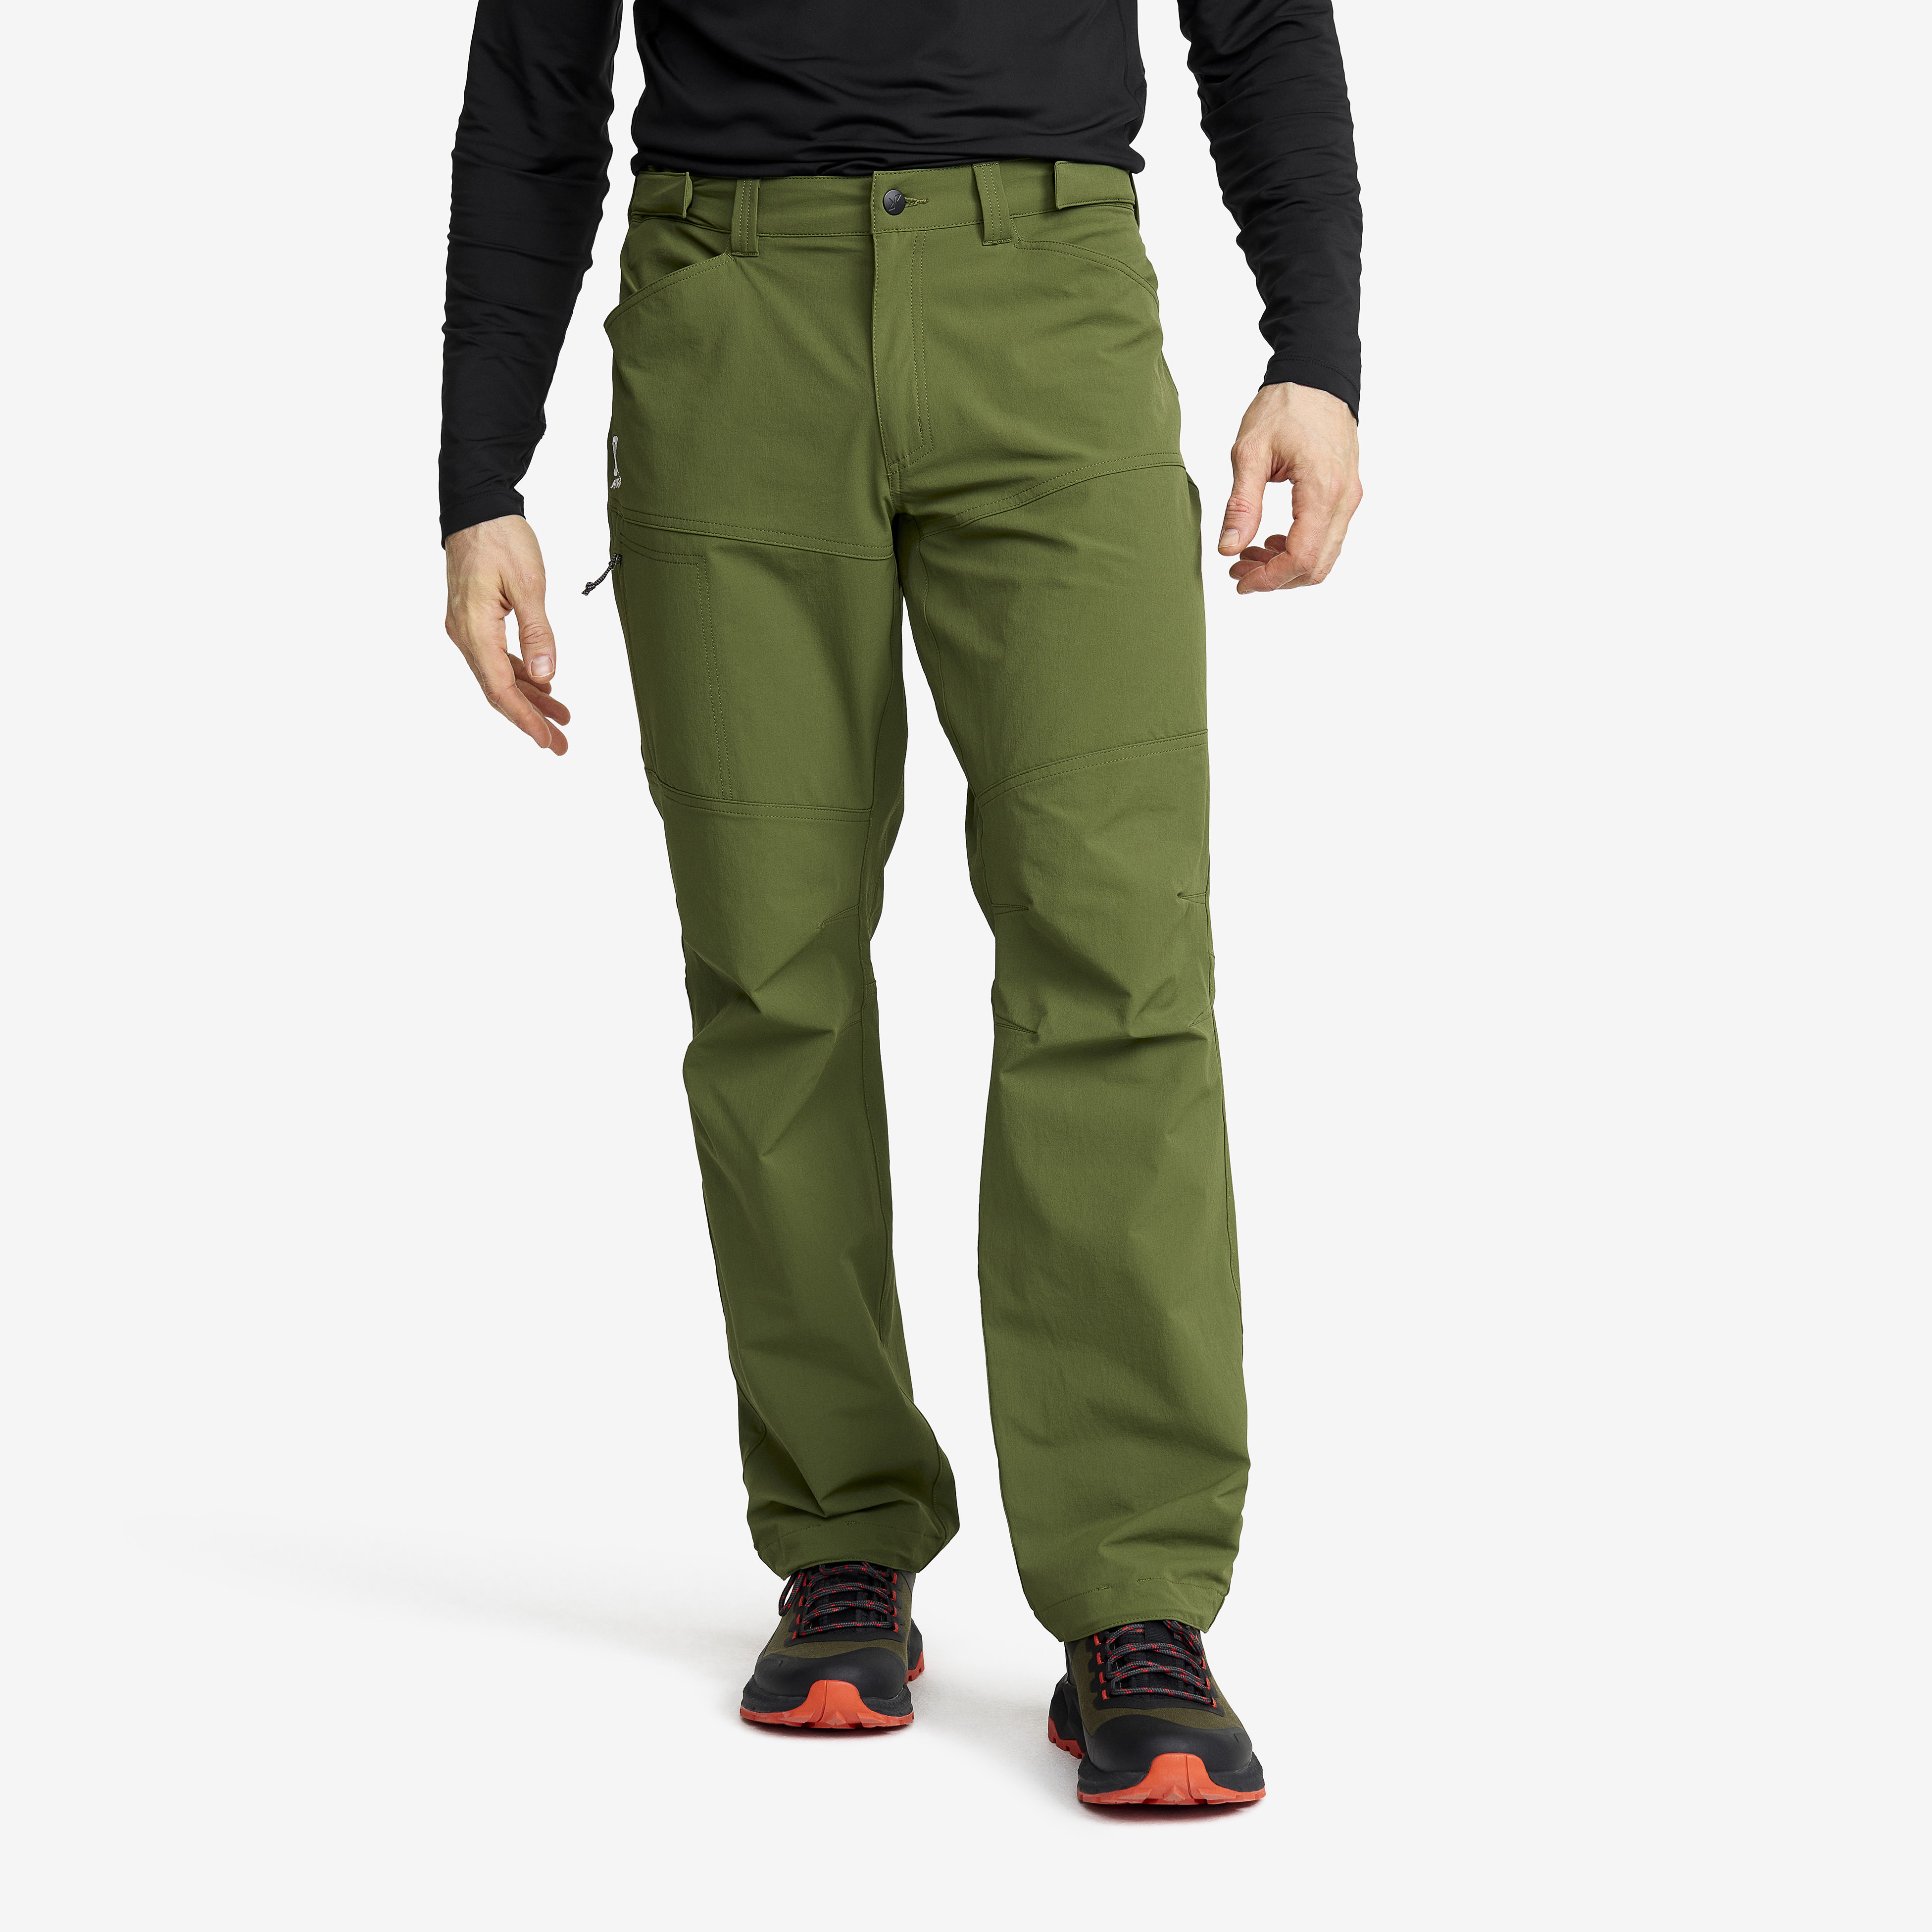 Venue Softstretch Pants Cypress Homme